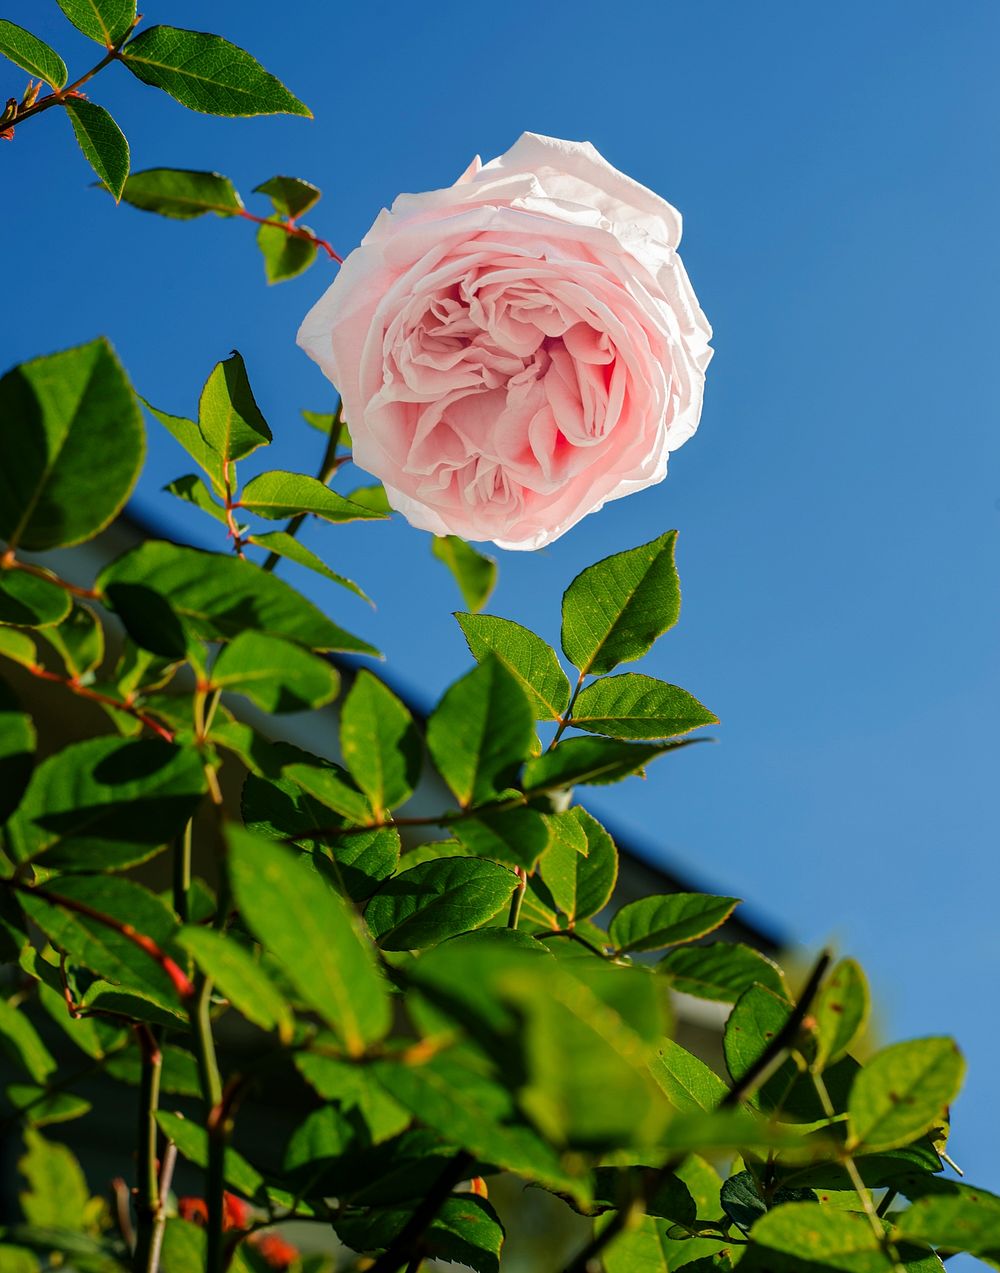 Pink carnation with green leaves and blue sky background. Original public domain image from Wikimedia Commons